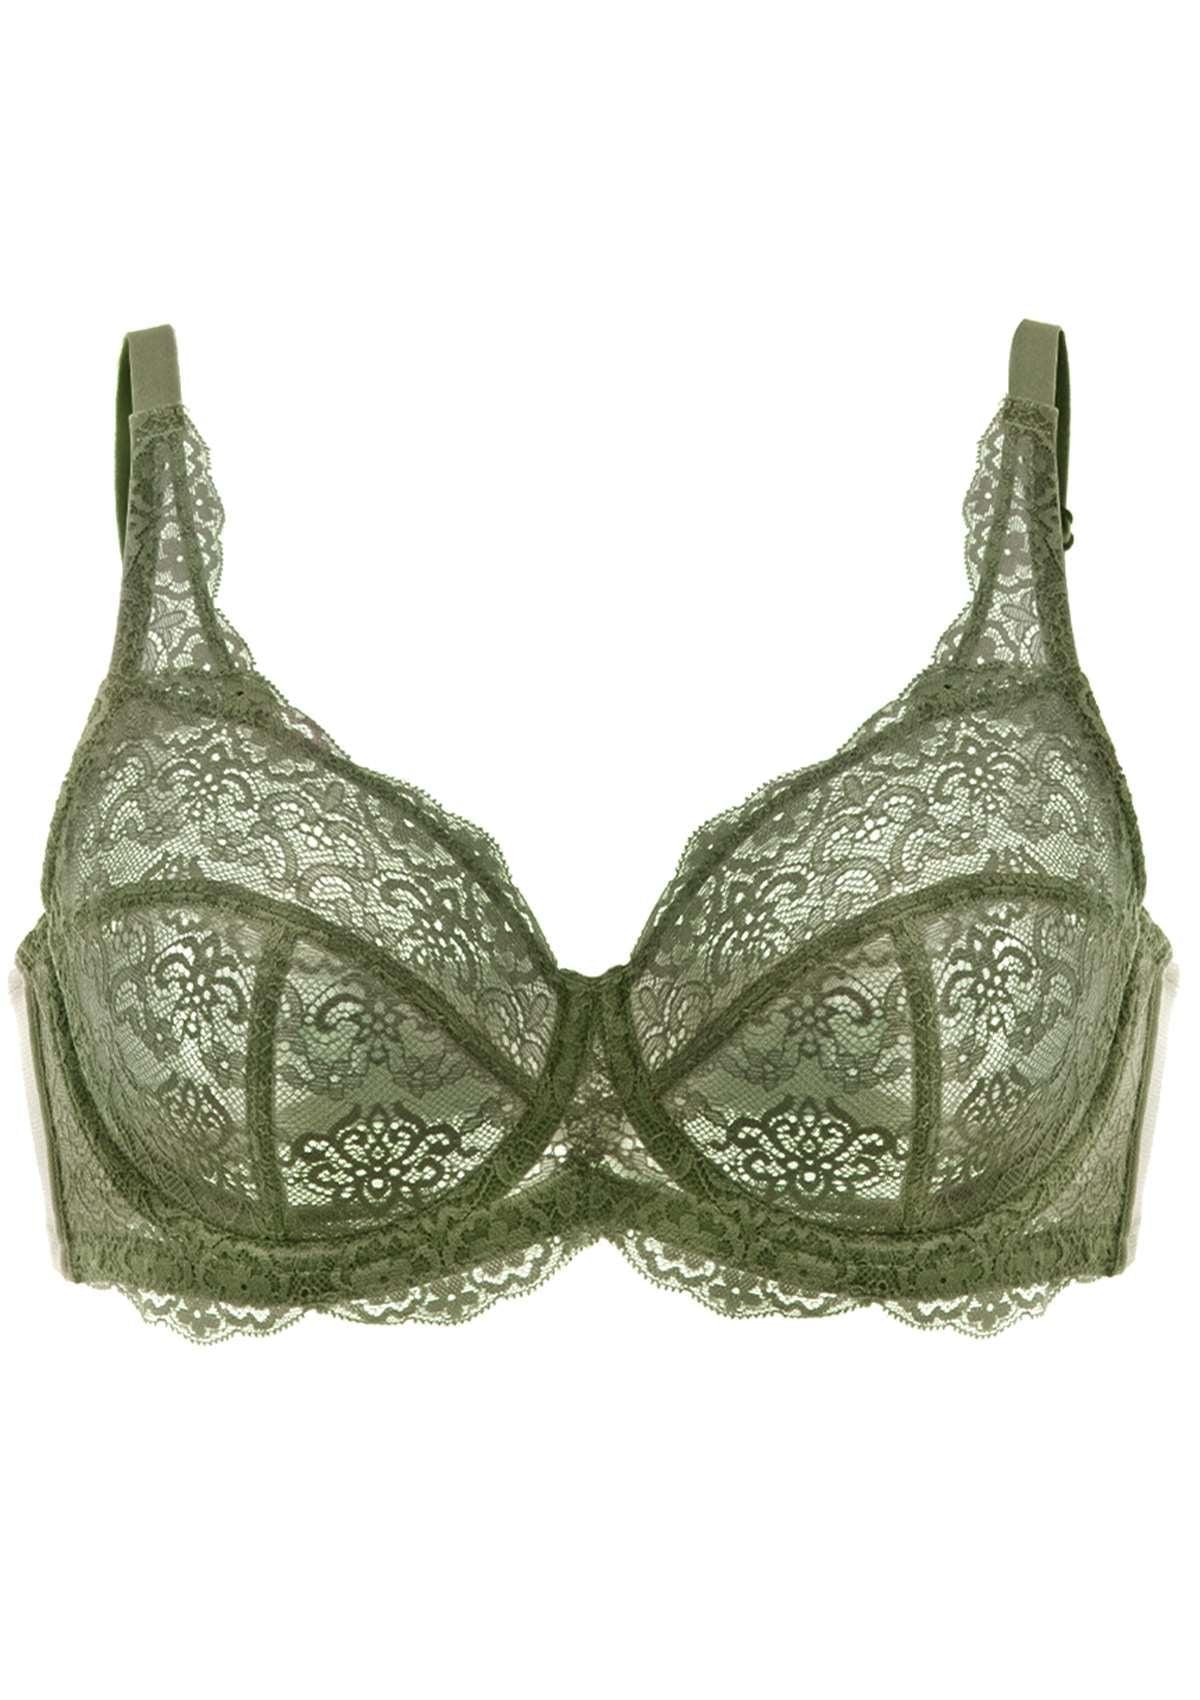 HSIA All-Over Floral Lace Unlined Bra: Minimizer Bra For Heavy Breasts - Dark Green / 36 / DDD/F